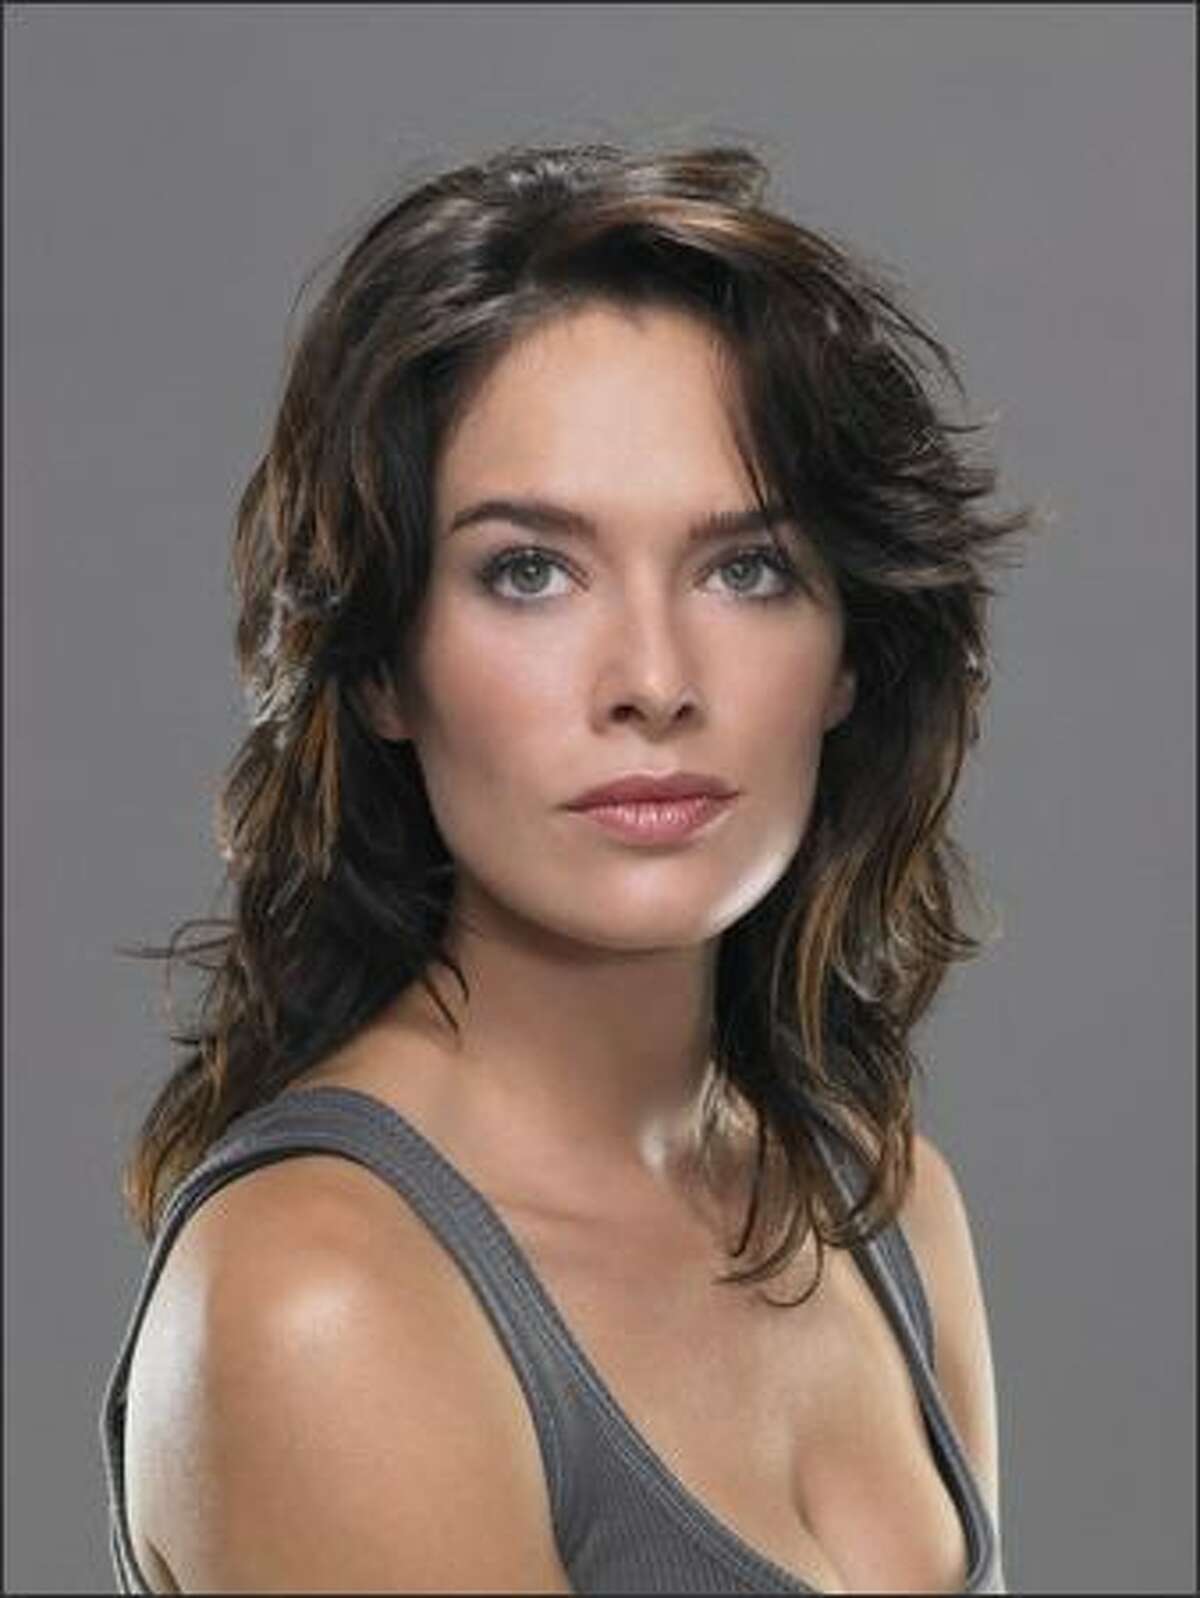 Sarah Connor (Lena Headey) finds herself in a dangerous and complicated new world in the new drama "Terminator: The Sarah Connor Chronicles" premiering Sunday on Fox.